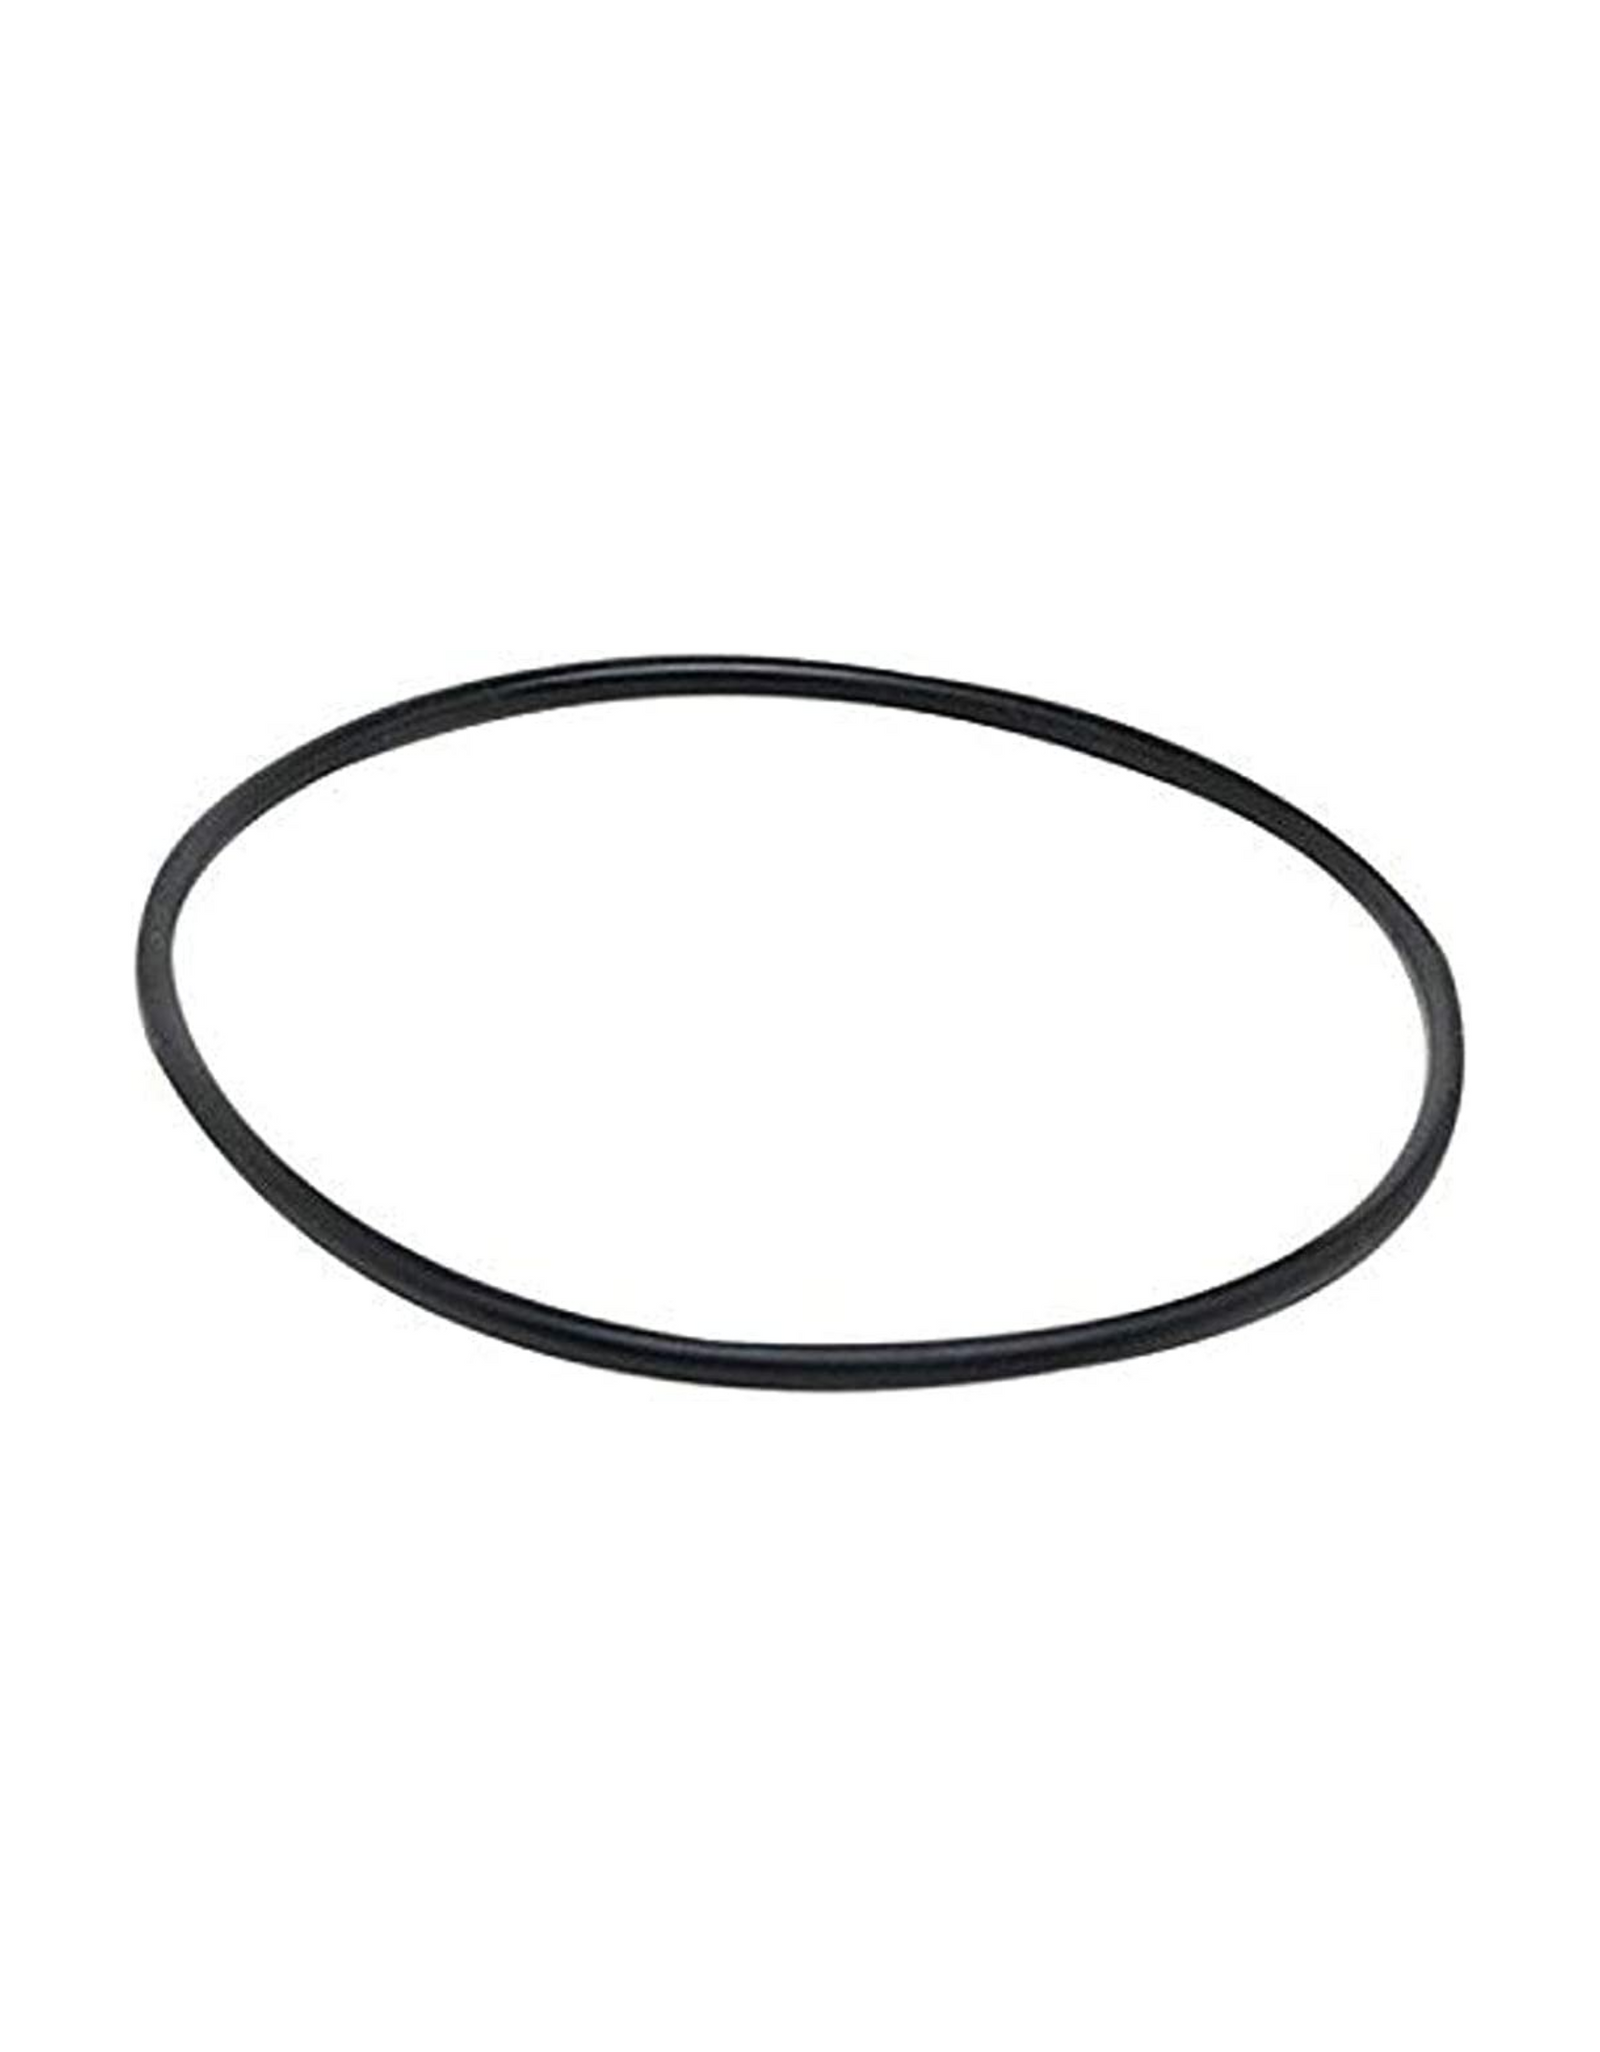 Fluval 104, 105, 204, 205, 106, 206 (A-20038) Replacement Motor Seal Ring